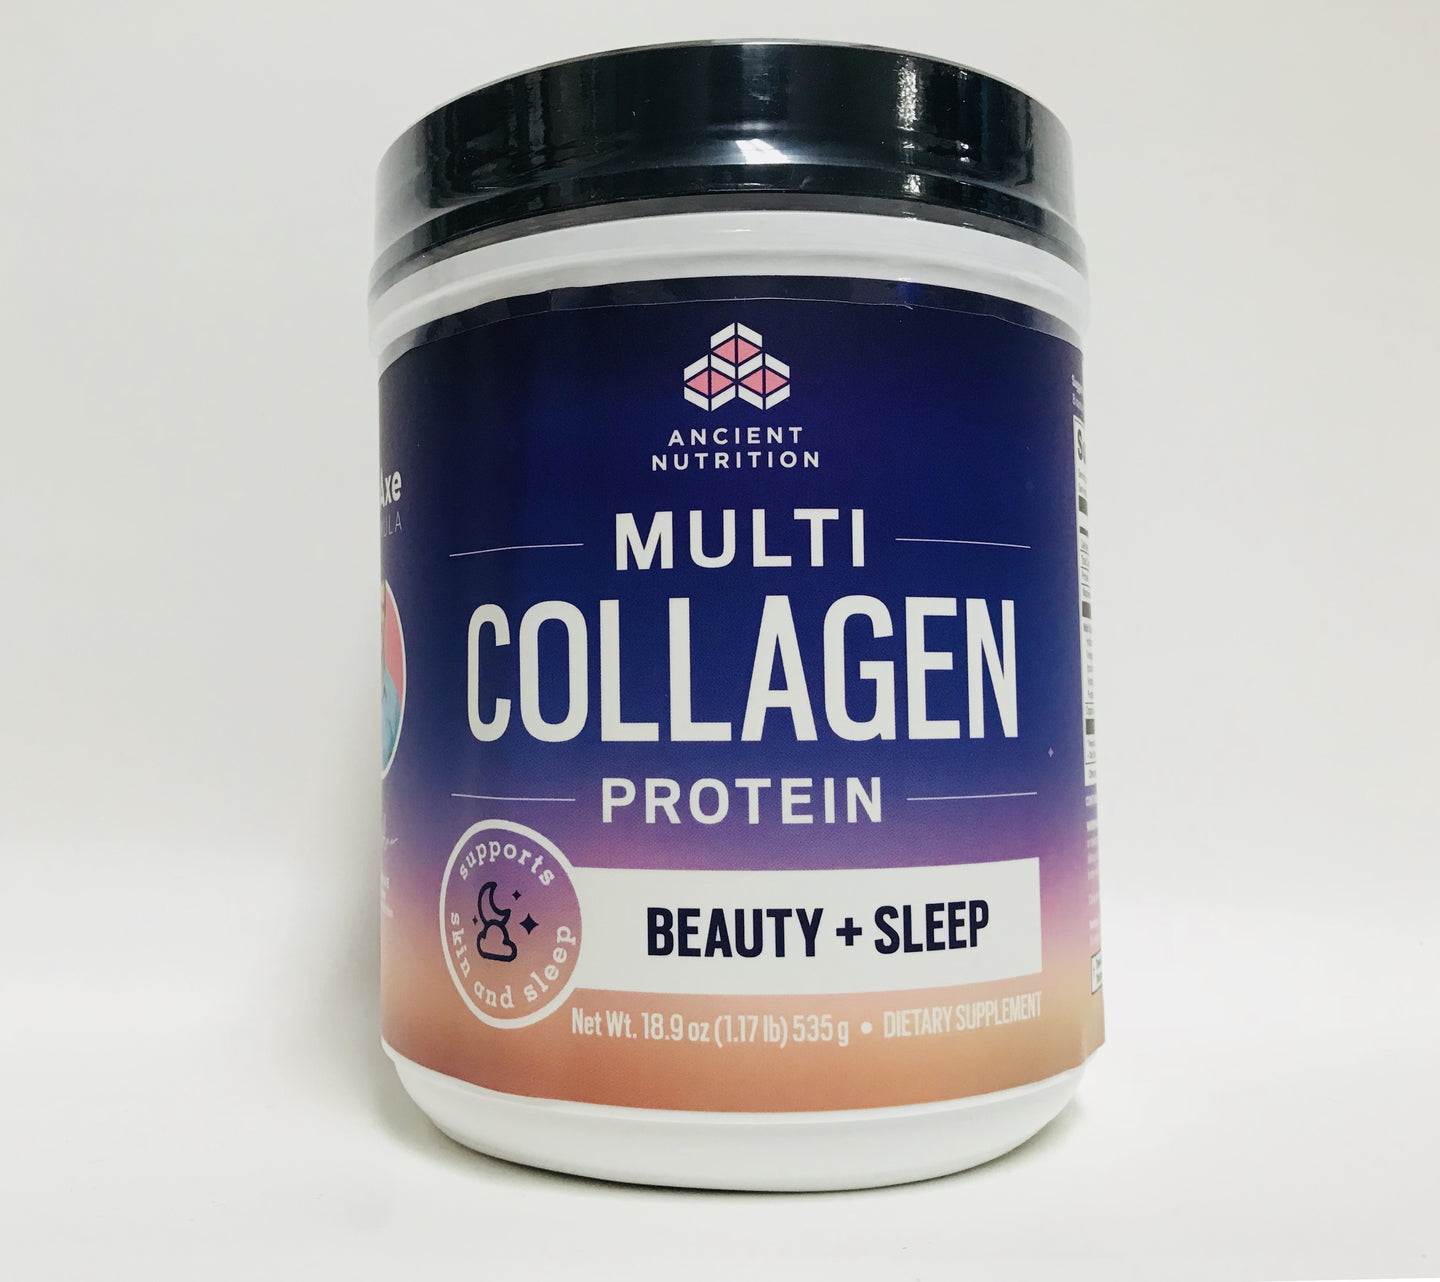 Ancient Nutrition Multi Collagen Protein Beauty and Sleep 18.9 oz